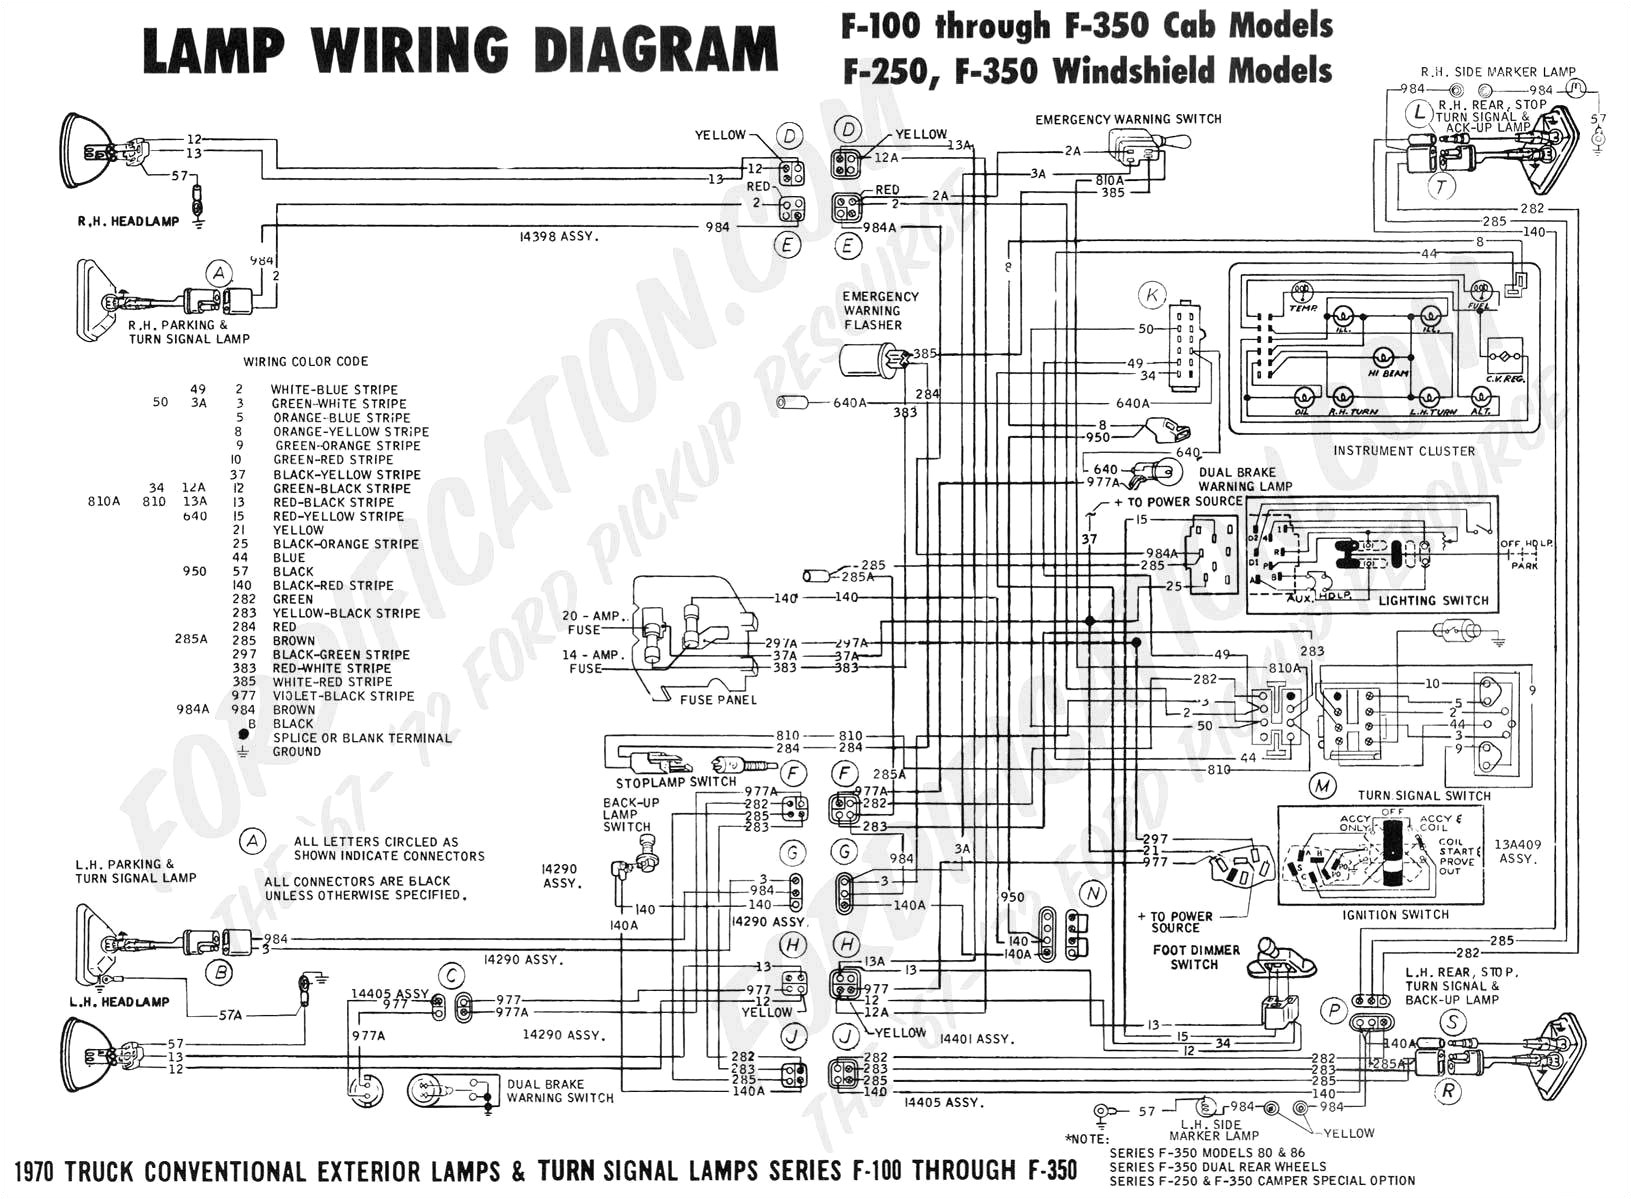 89 50 wiring diagrams wiring diagram article review89 f150 wiring diagram wiring diagram database